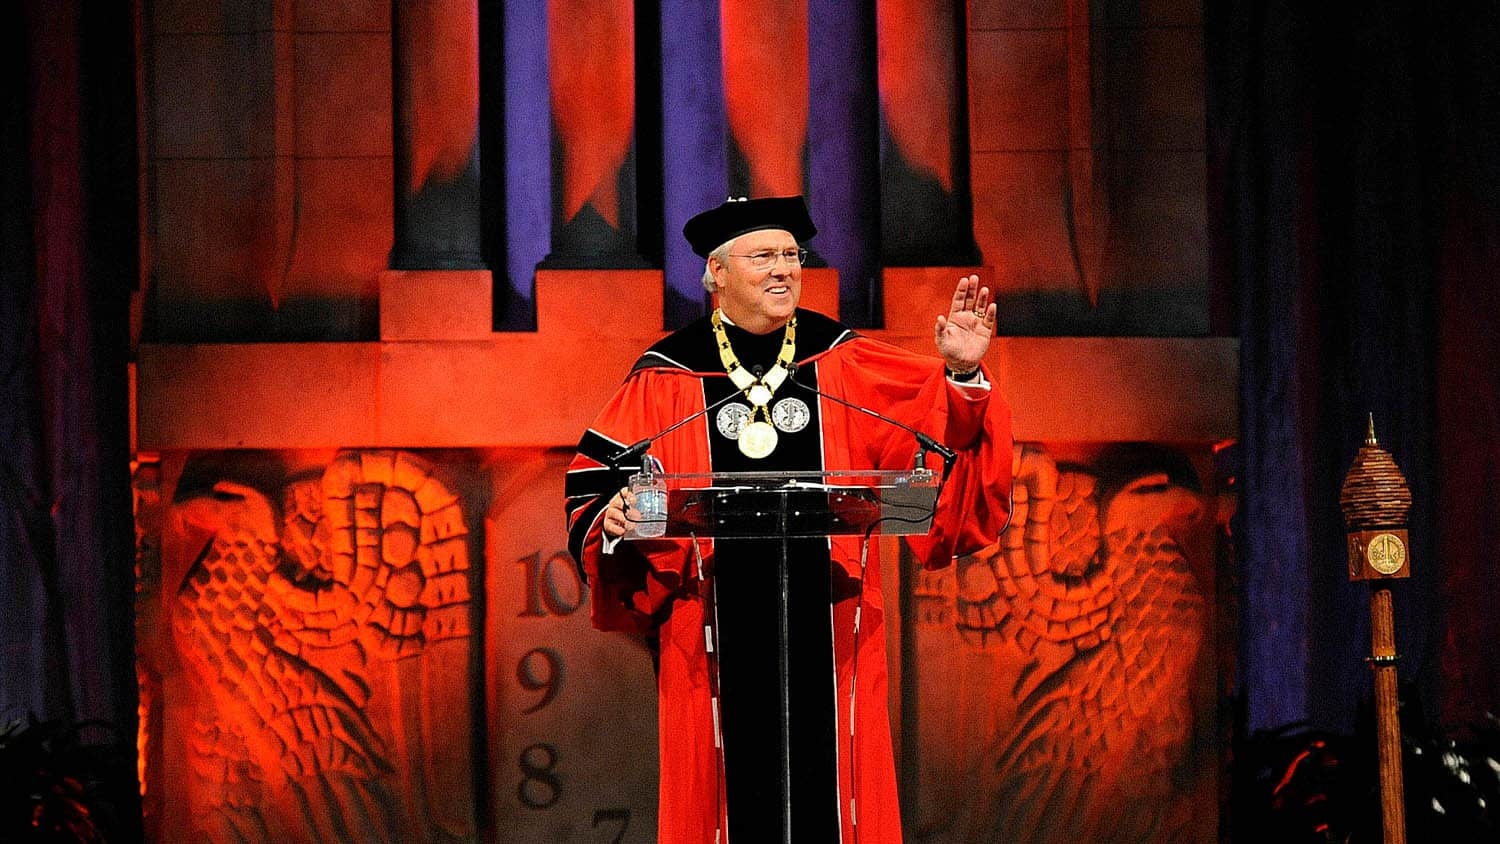 Chancellor Woodson wearing red commencement regalia, standing at a podium with an image of the Belltower in the background, and waving to the crowd